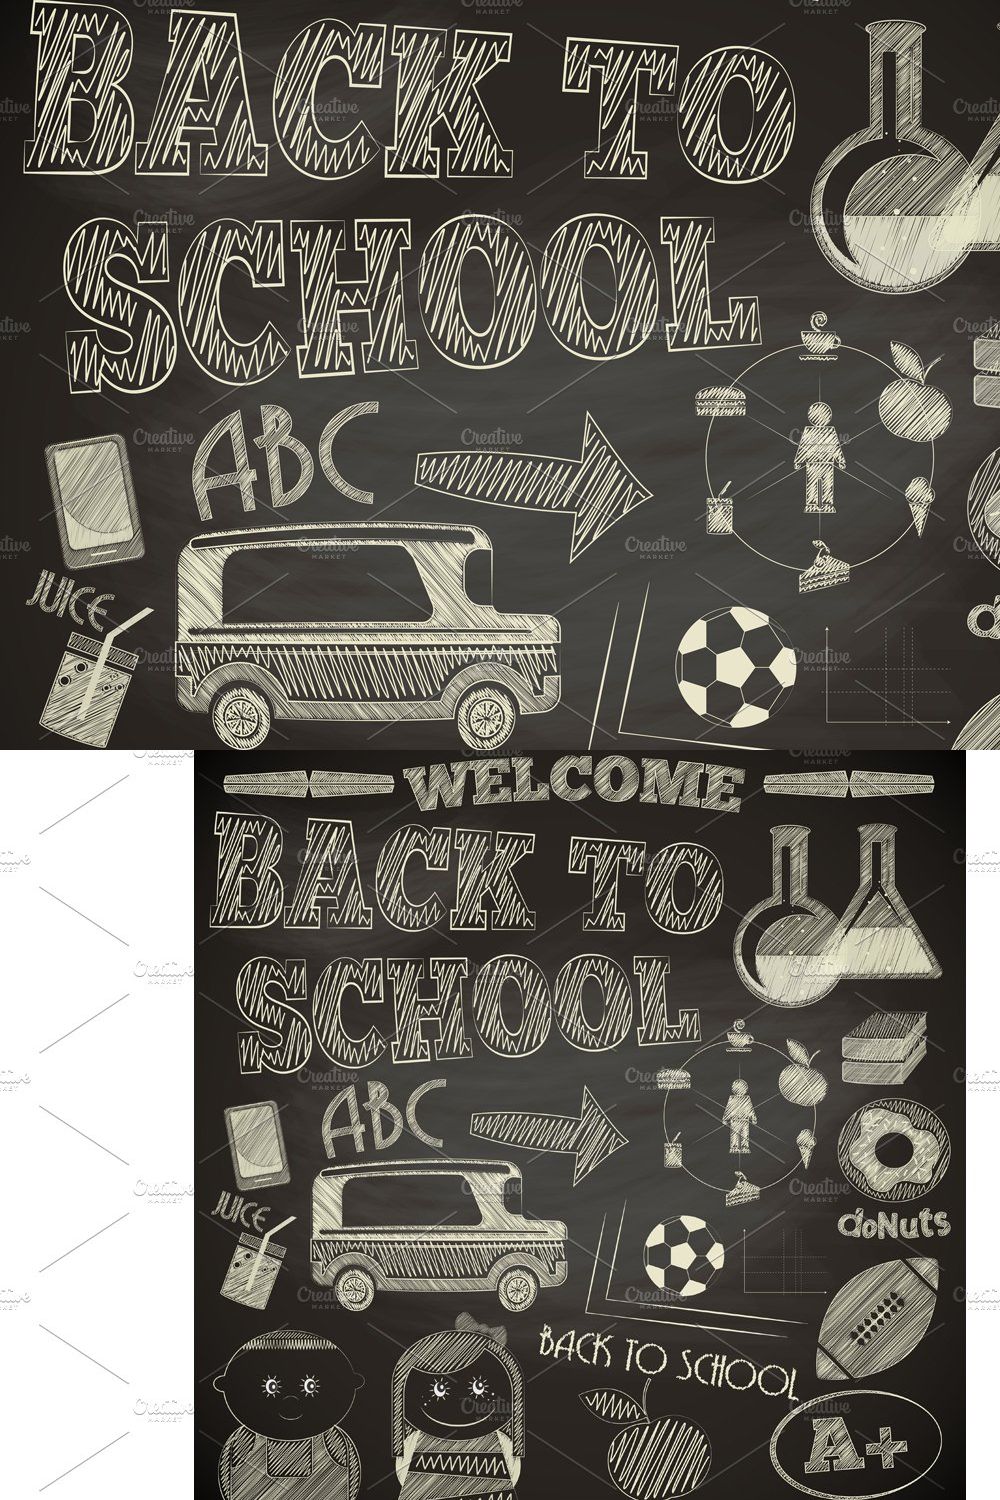 Back to School pinterest preview image.